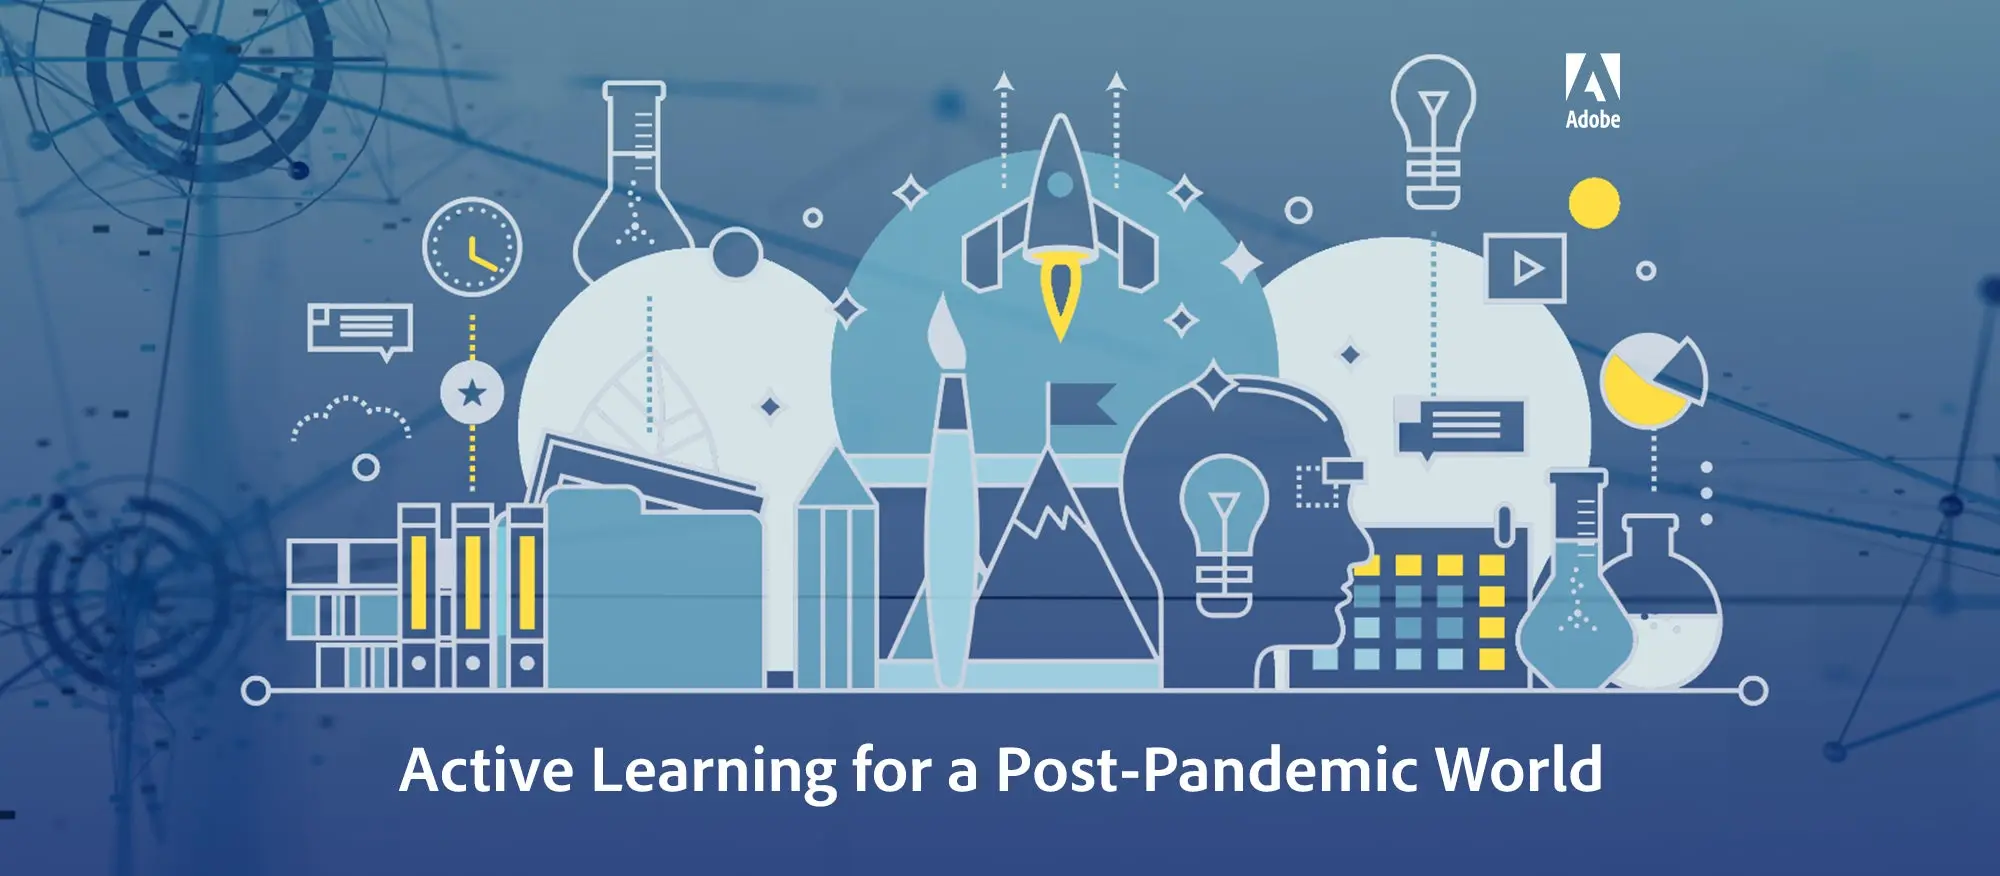 Active Learning for a Post-Pandemic World. 